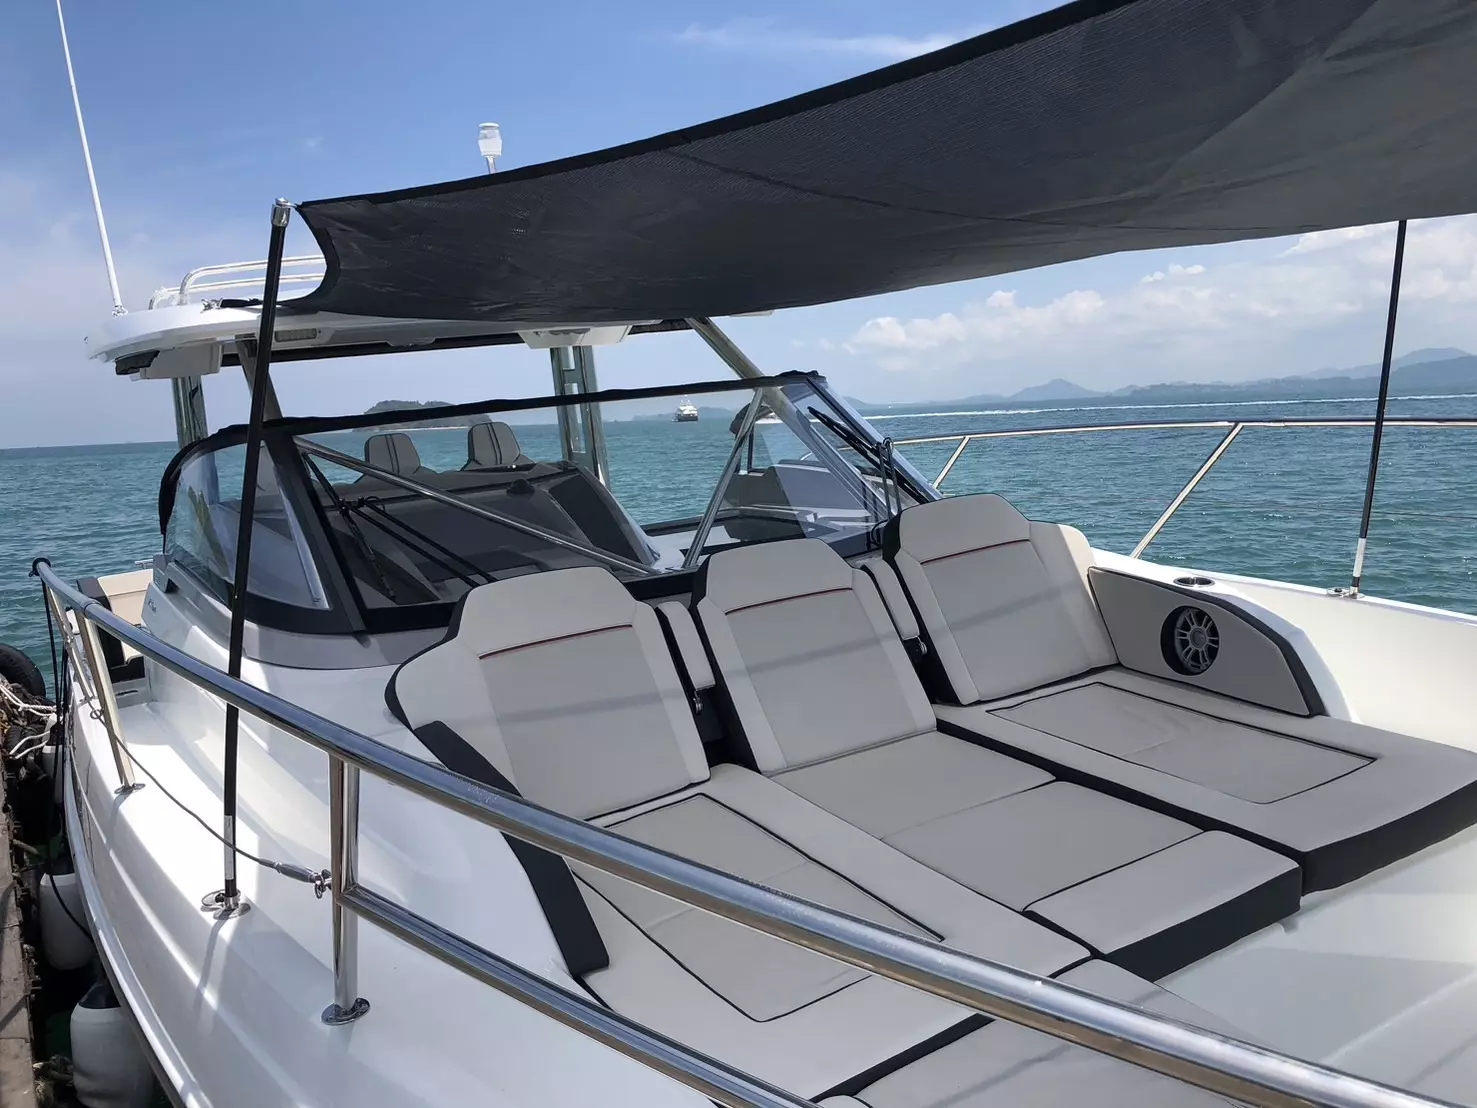 NaNea by Jeanneau - Top rates for a Charter of a private Power Boat in Thailand